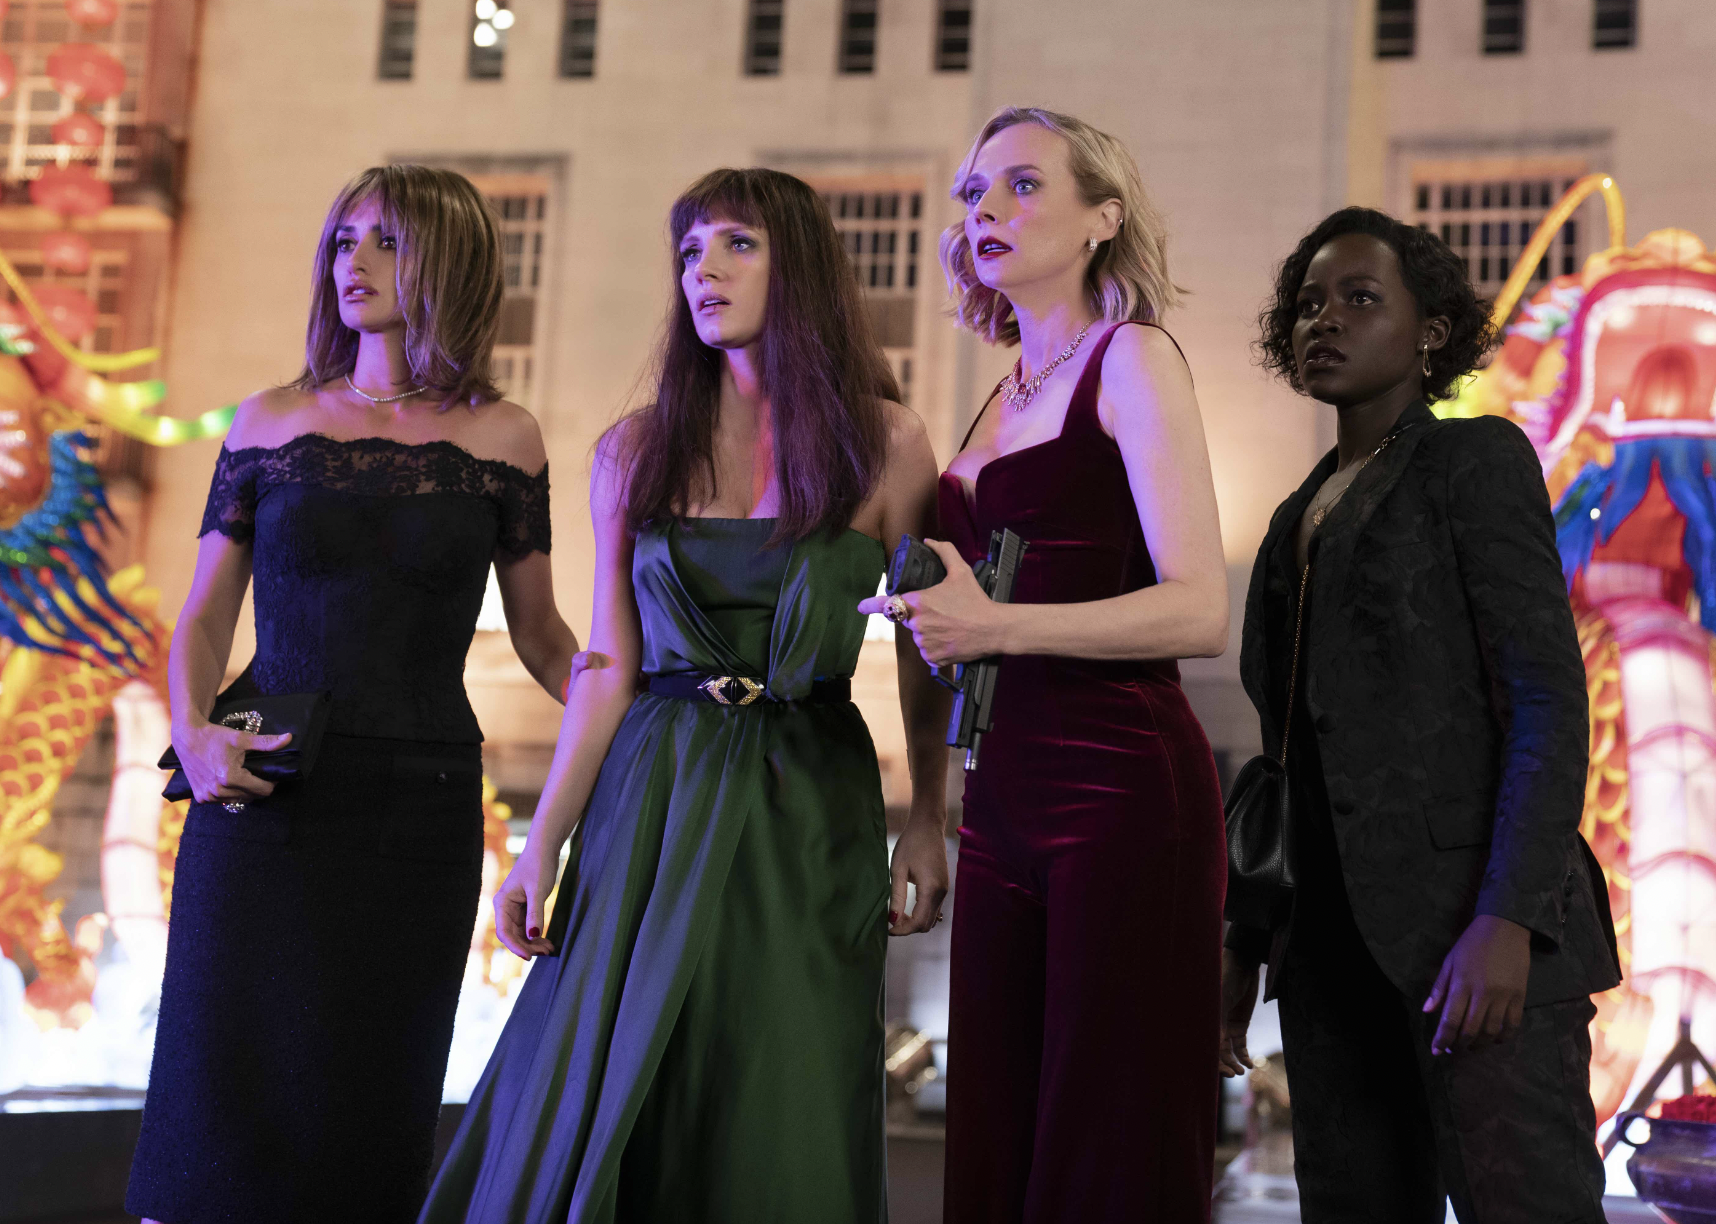 Penélope Cruz, Diane Kruger, Jessica Chastain, and Lupita Nyong'o in "The 355"